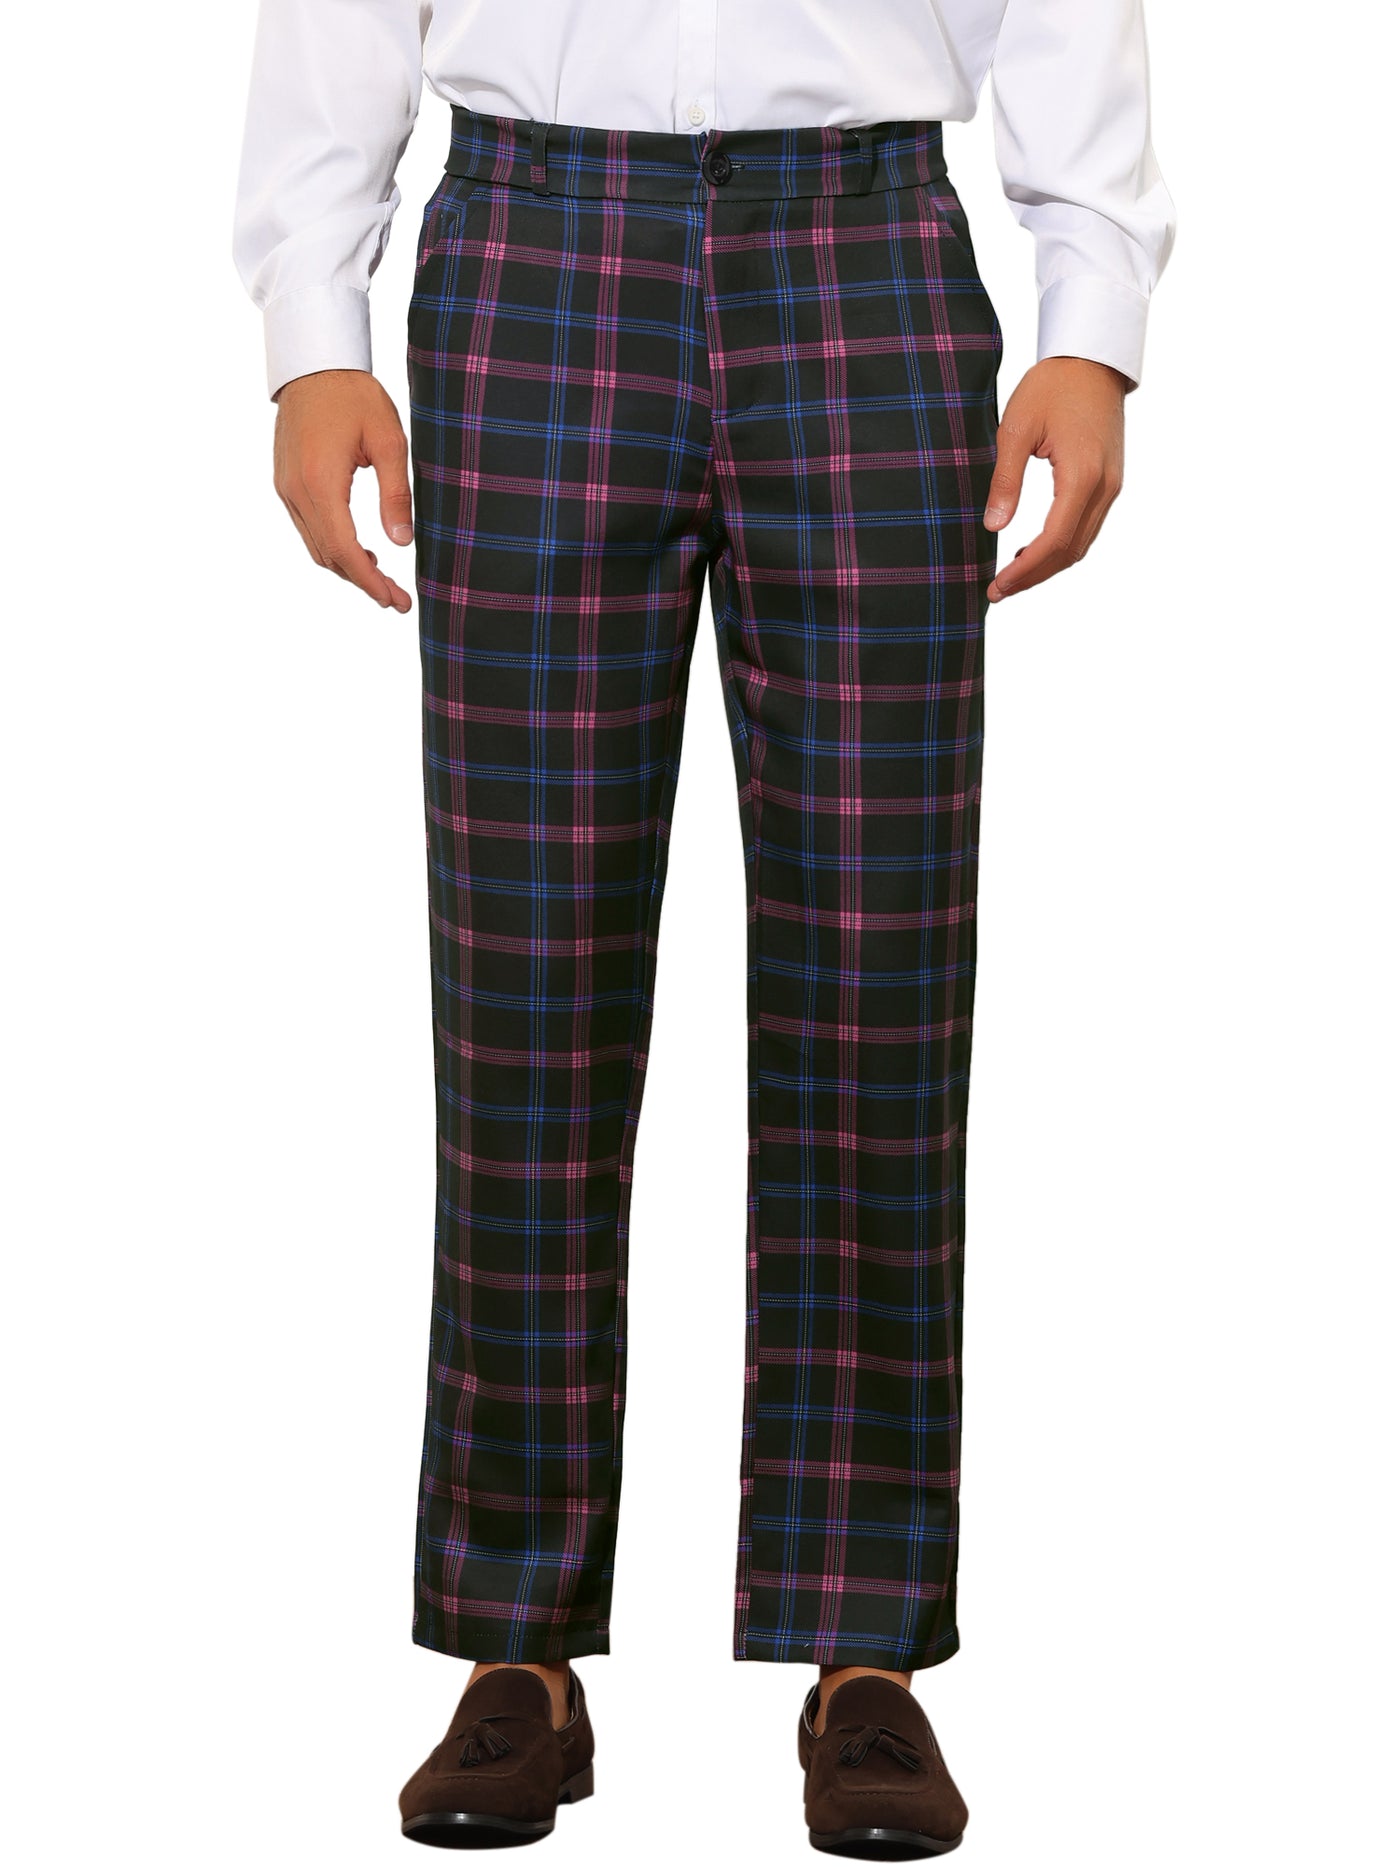 Bublédon Plaid Formal Pants for Men's Straight Fit Flat Front Office Checked Pattern Trousers